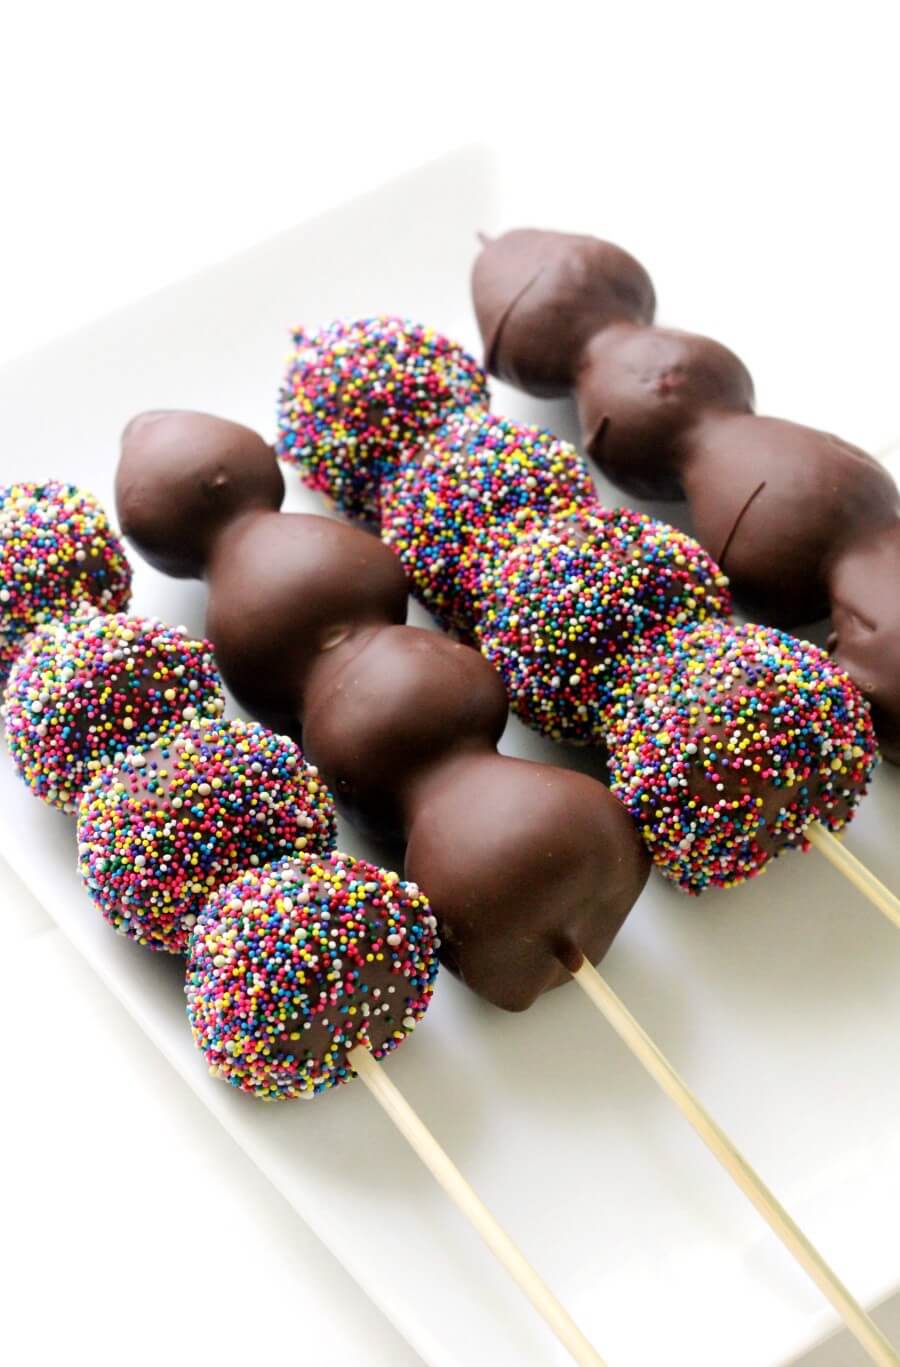 Chocolate covered strawberries on a stick